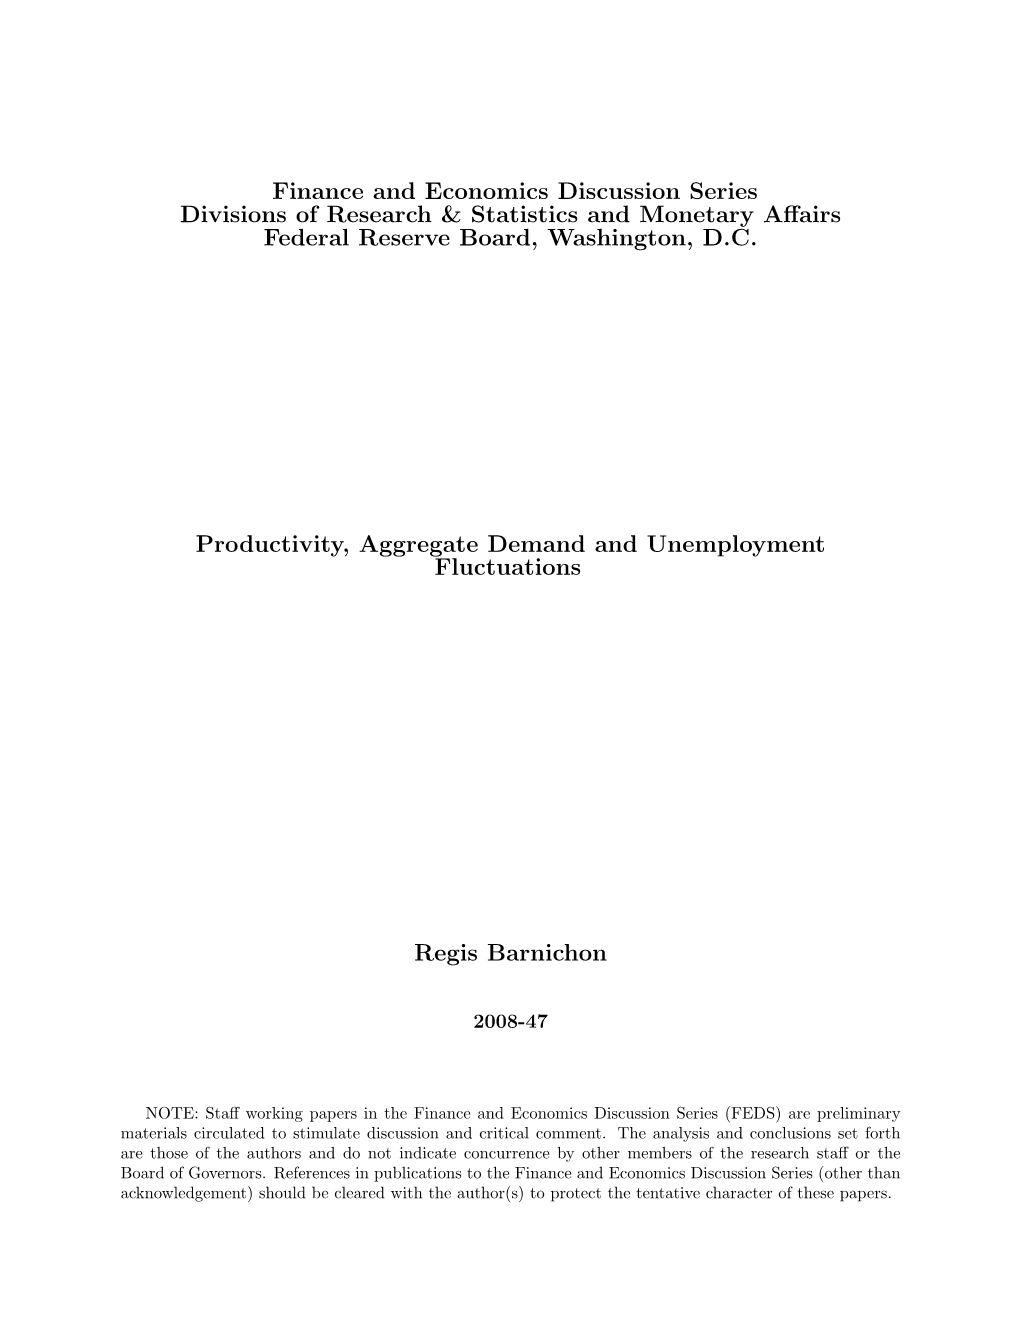 Productivity, Aggregate Demand and Unemployment Fluctuations